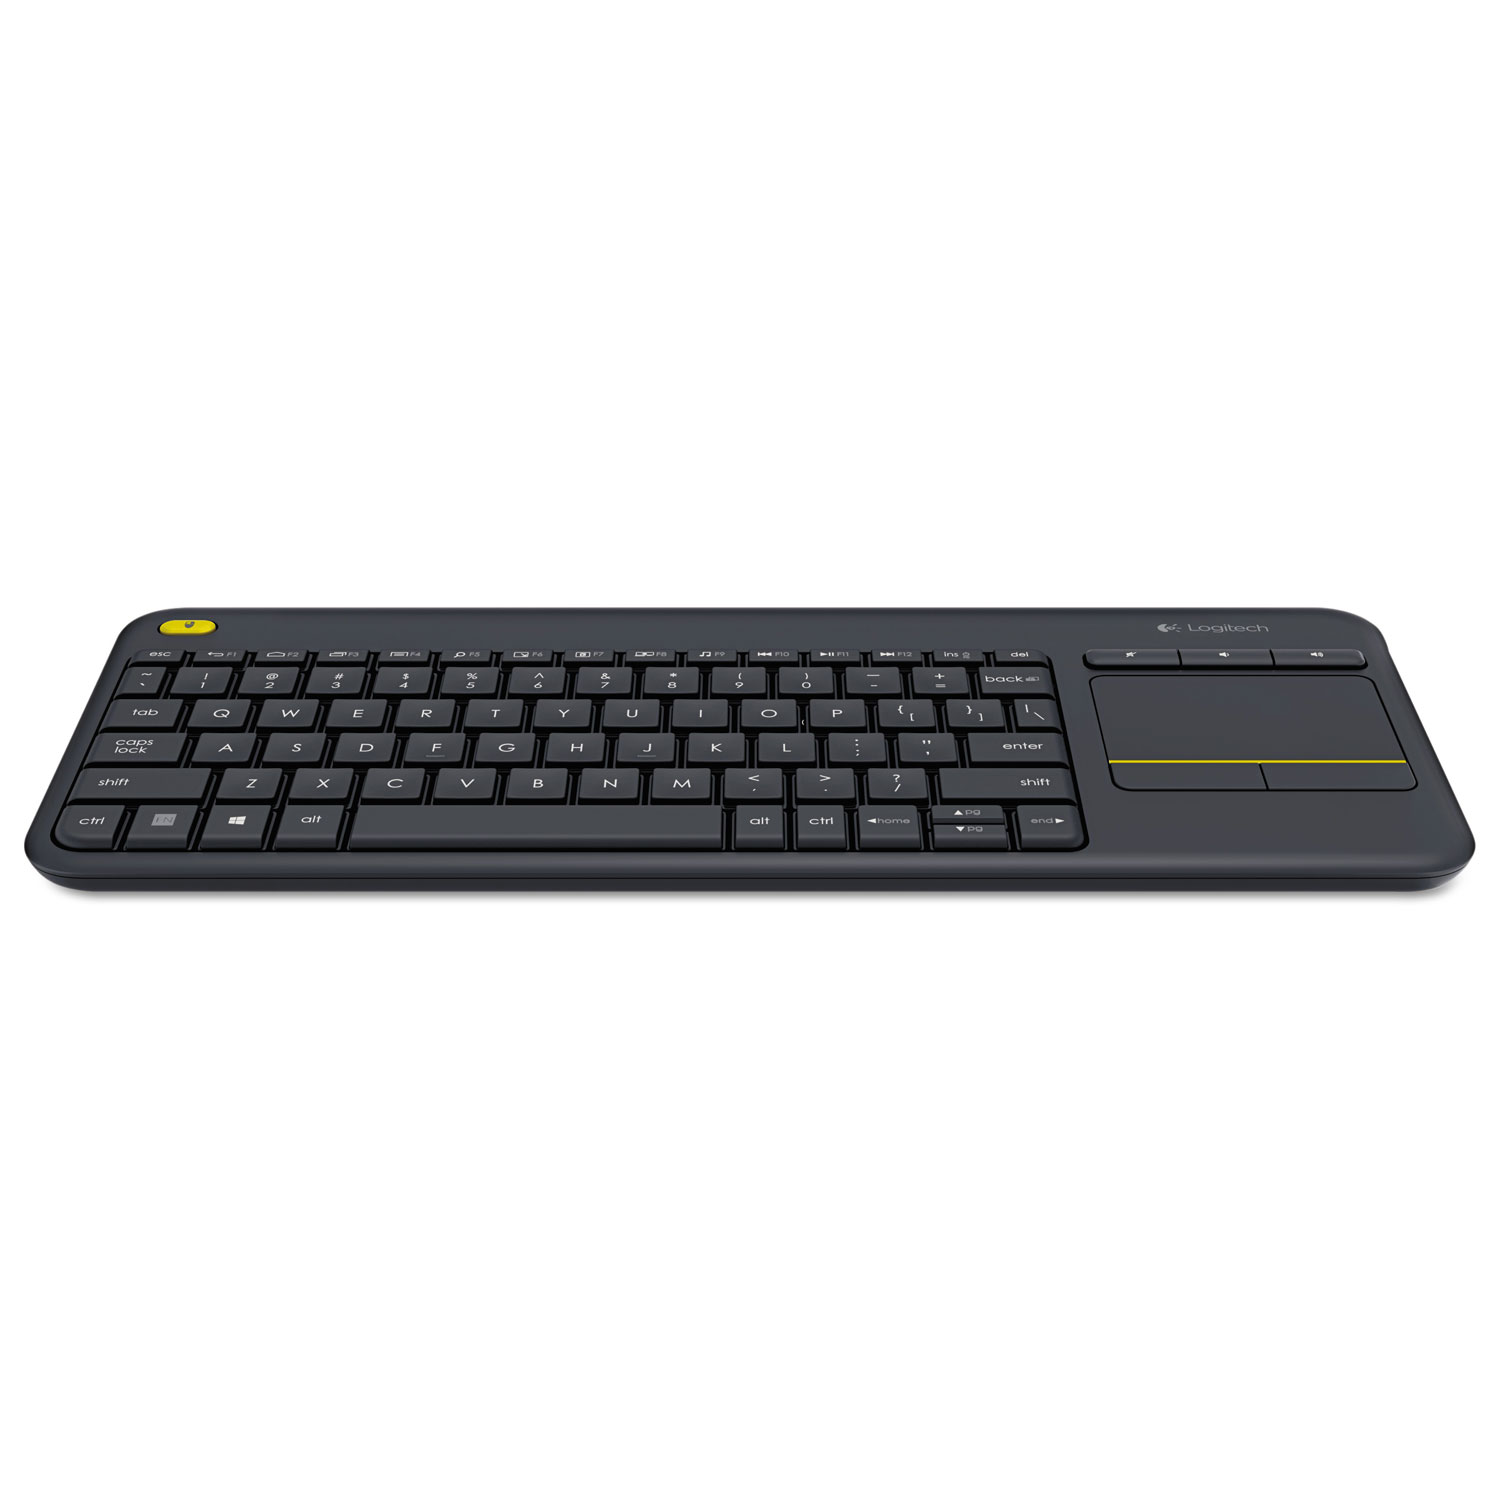 To the truth Glossary legation Wireless Touch Keyboard K400 Plus, Black - Supply Solutions